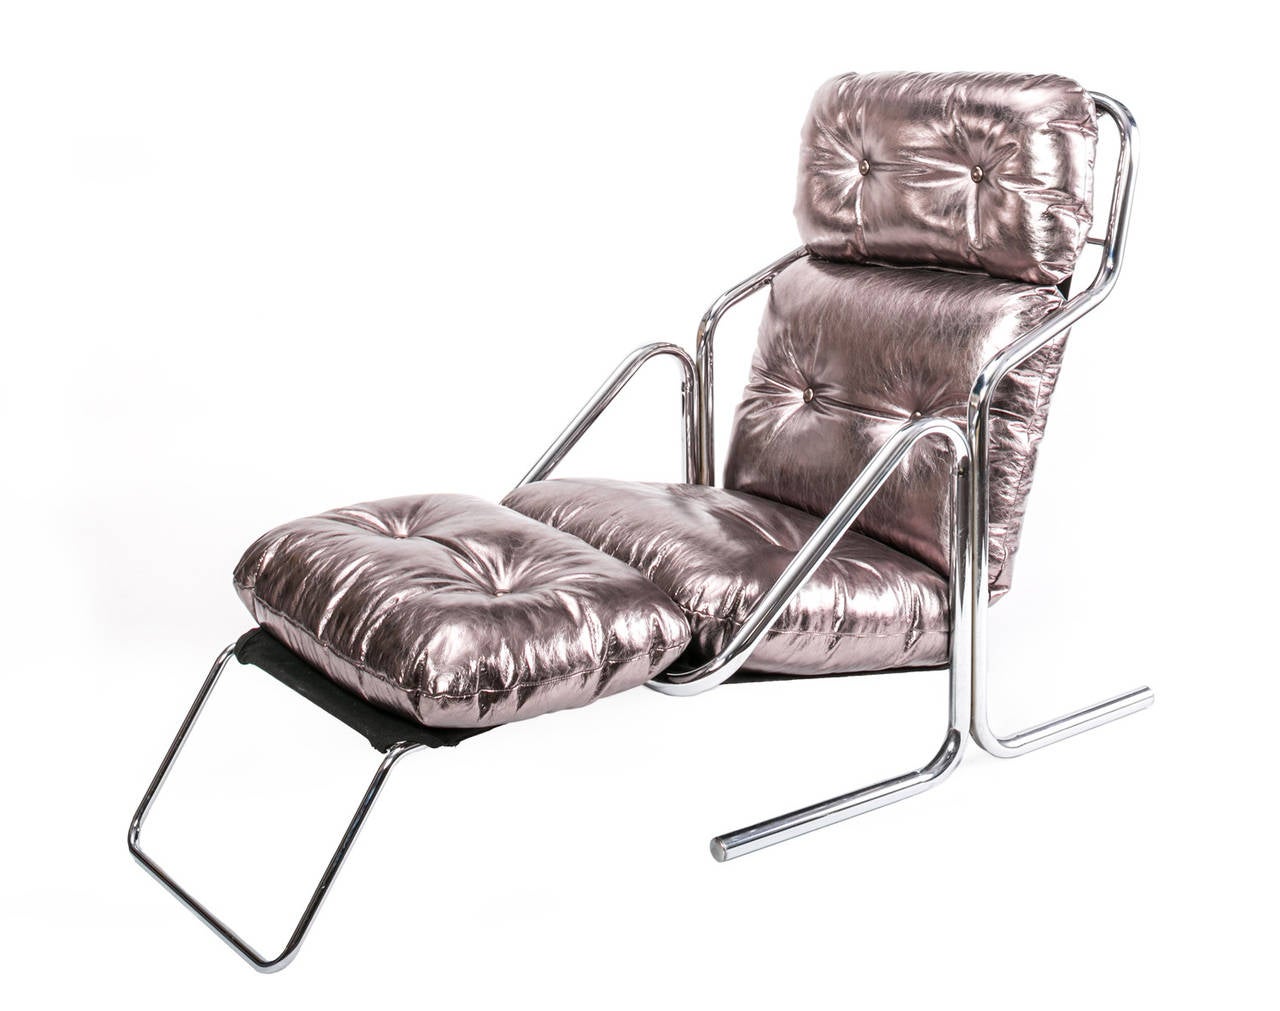 Jerry Johnson 1970’s retractable lounger in custom lavender metallic leather.